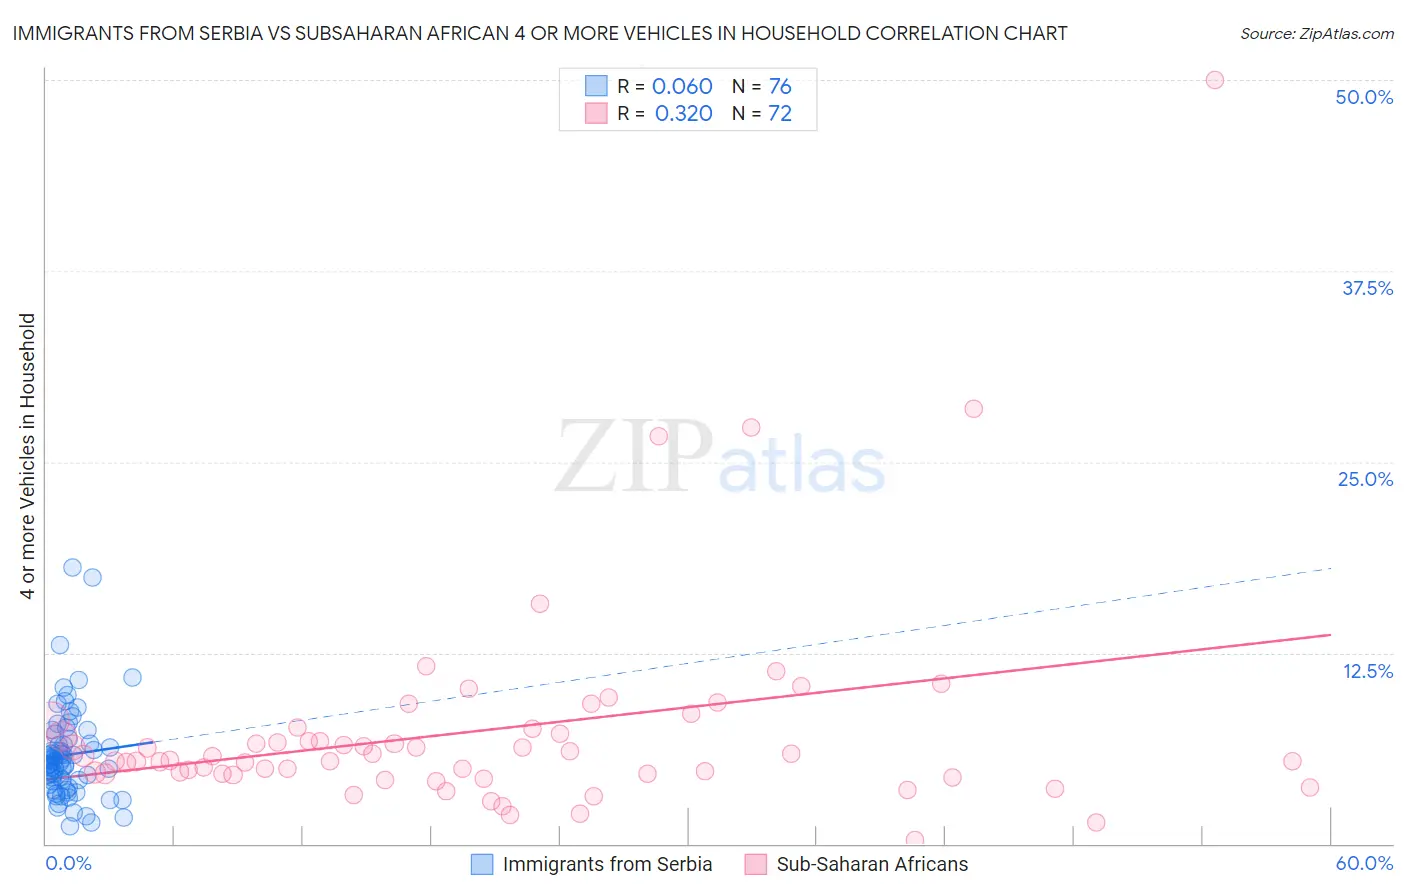 Immigrants from Serbia vs Subsaharan African 4 or more Vehicles in Household